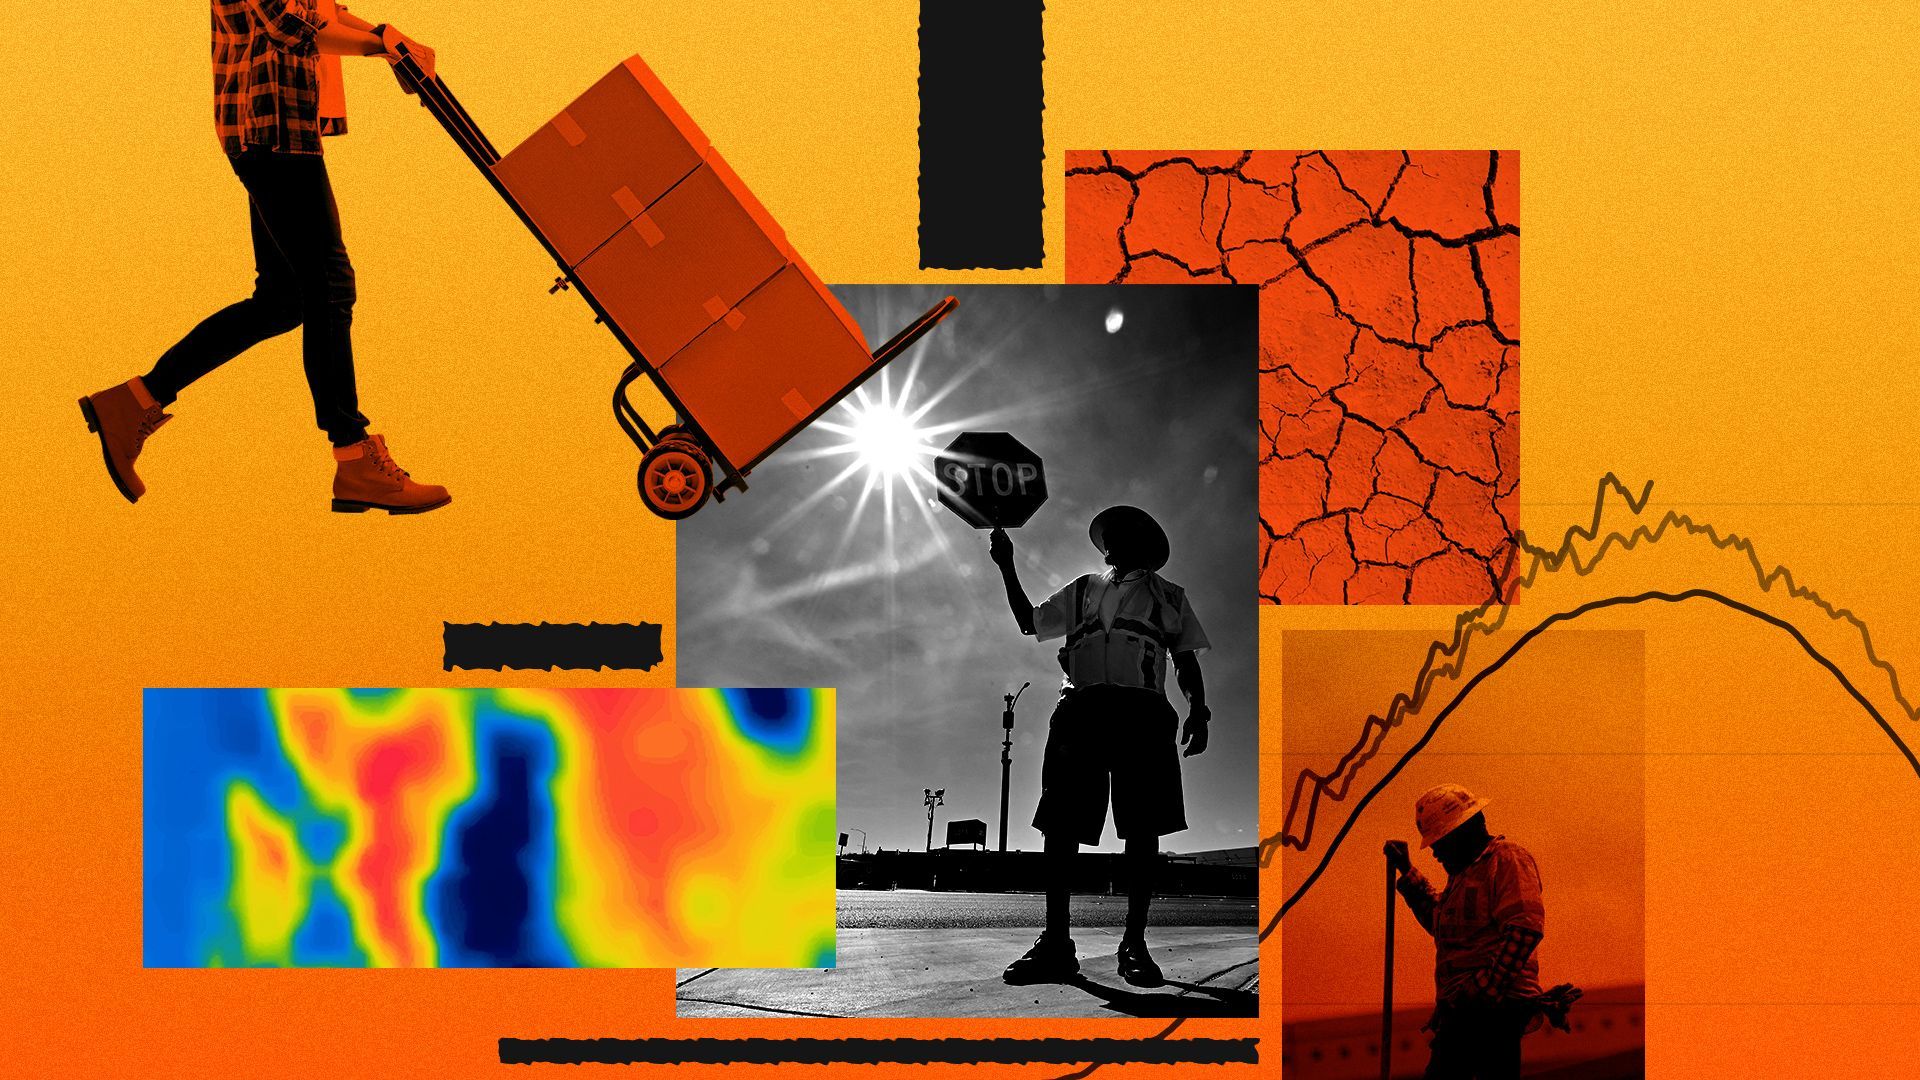 Photo illustration of workers outside in the heat, surrounded by abstract shapes distorted by heat, heat map images, and an upward trending temperature chart. 